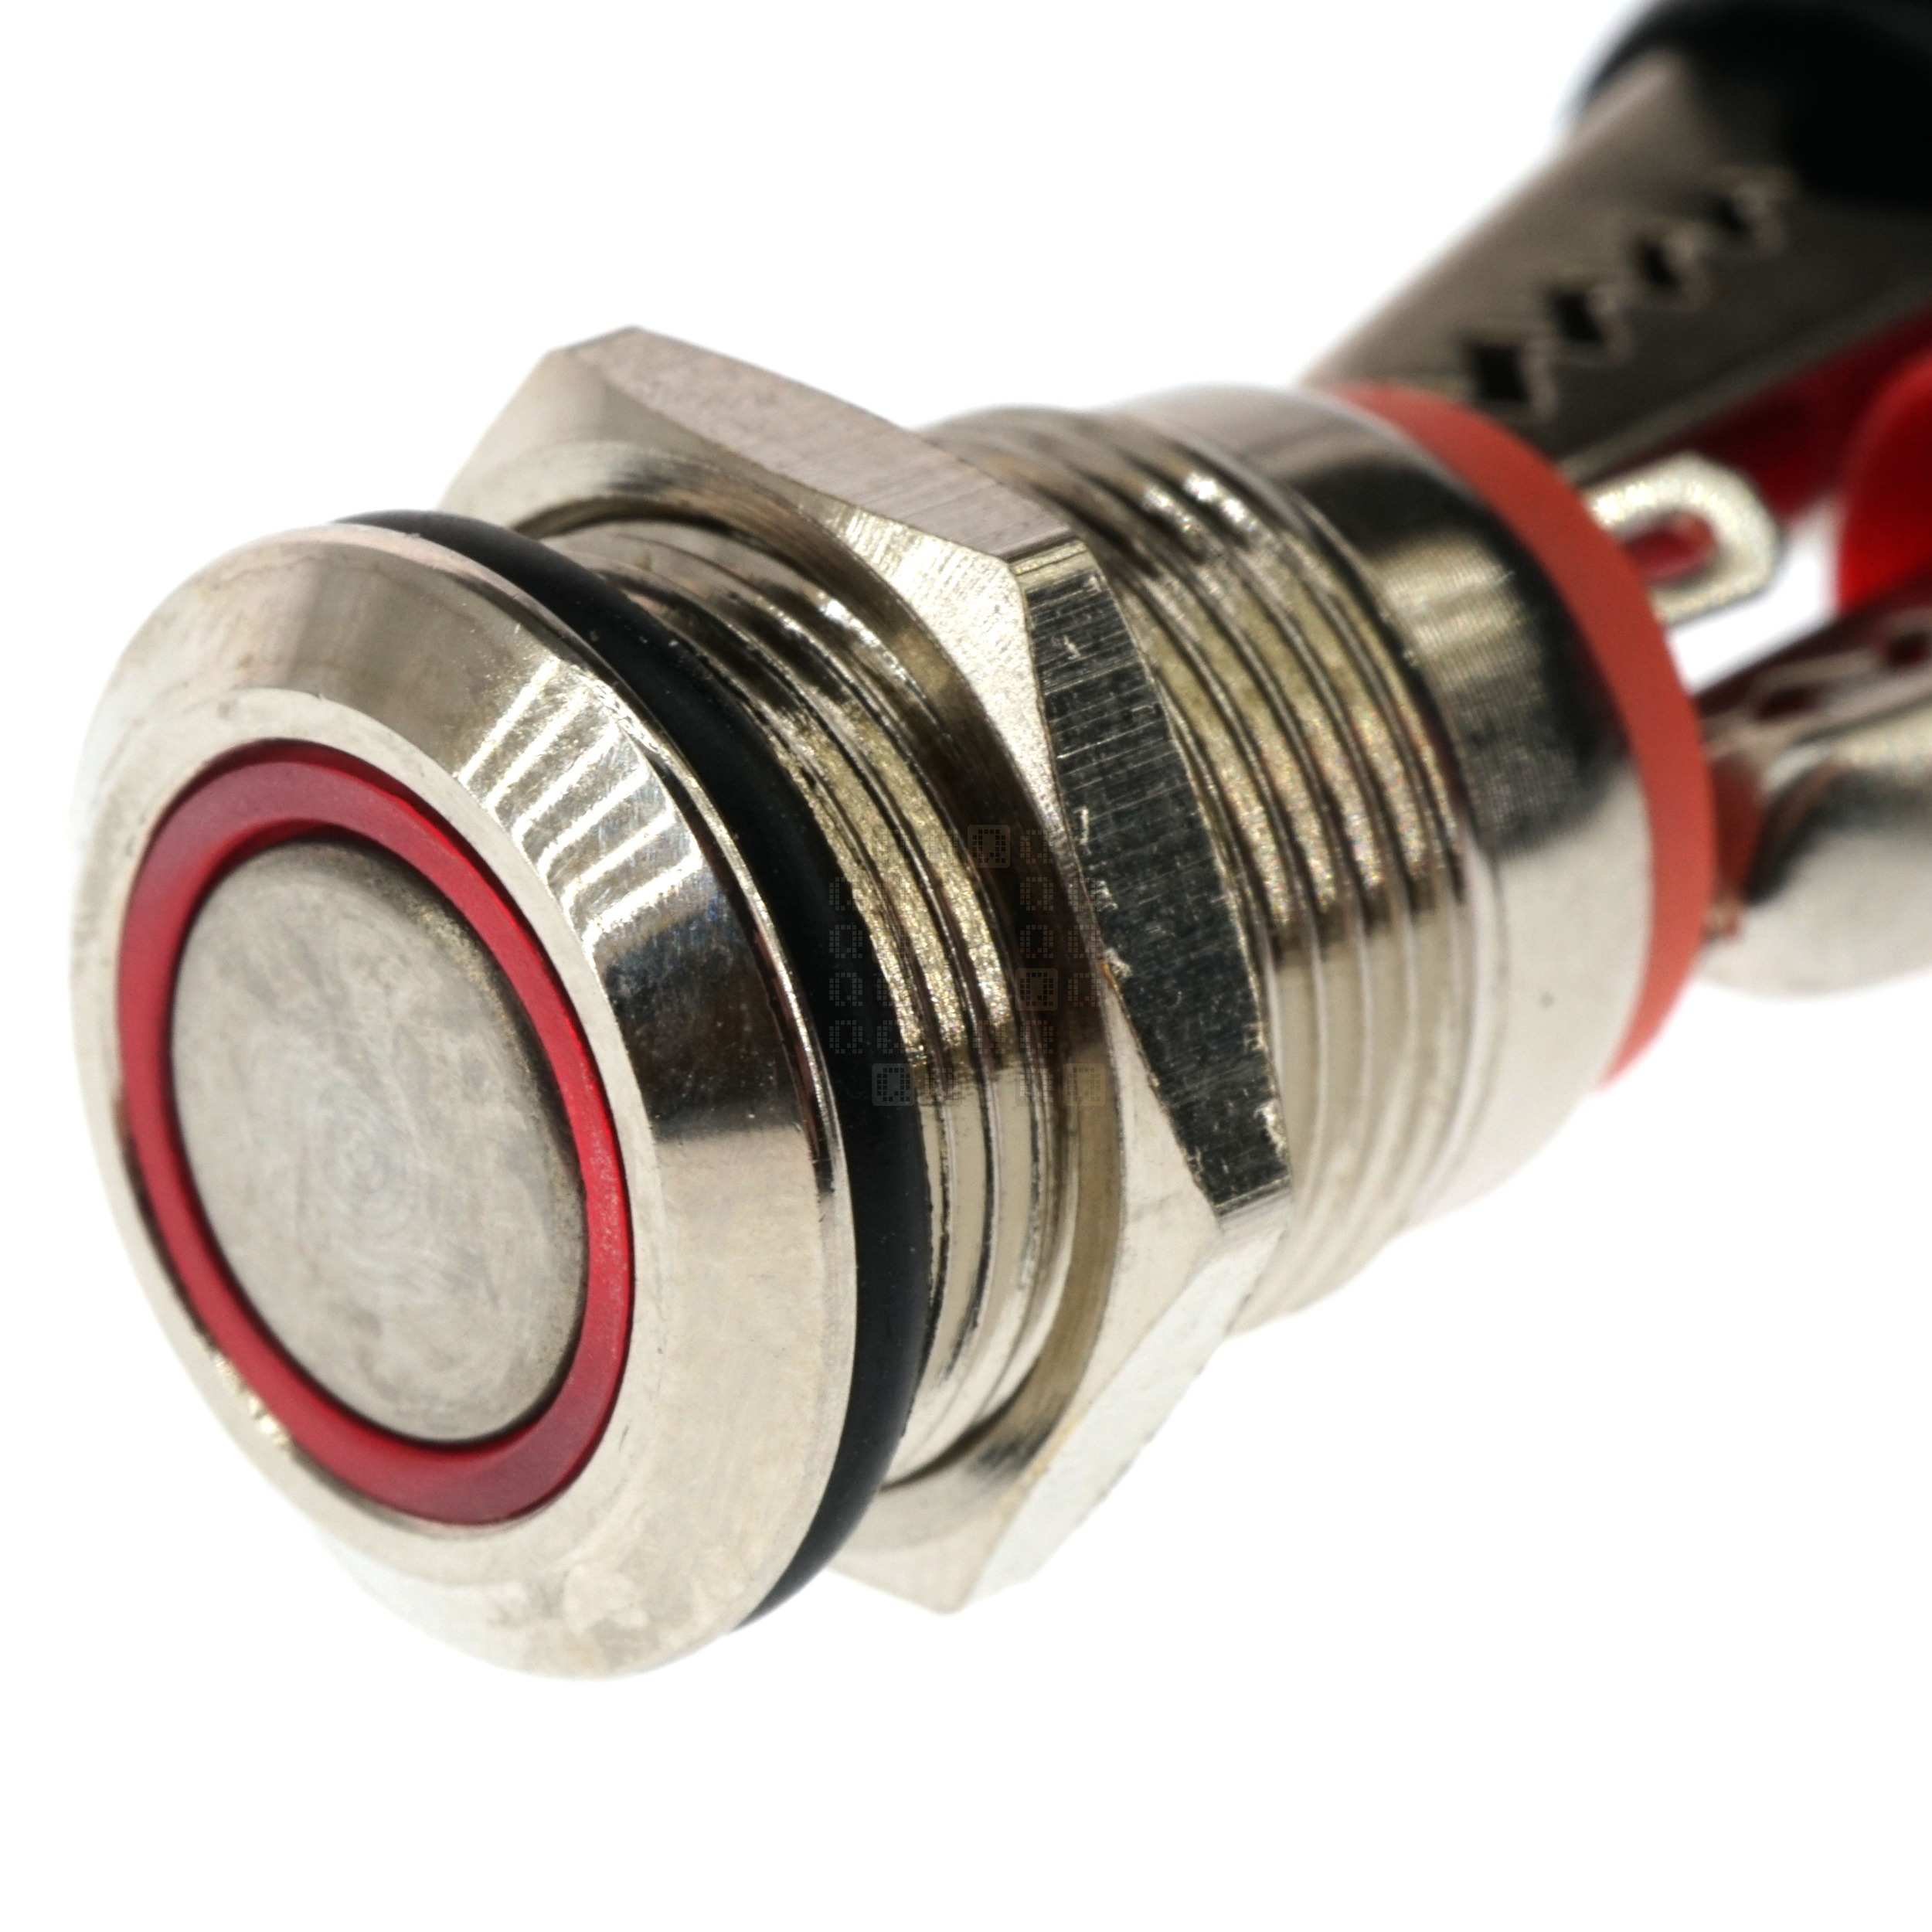 12mm Threaded Metal Pushbutton, Momentary, Red LED, 12-24VDC, IP65, SPST, Lighted Ring/Circle